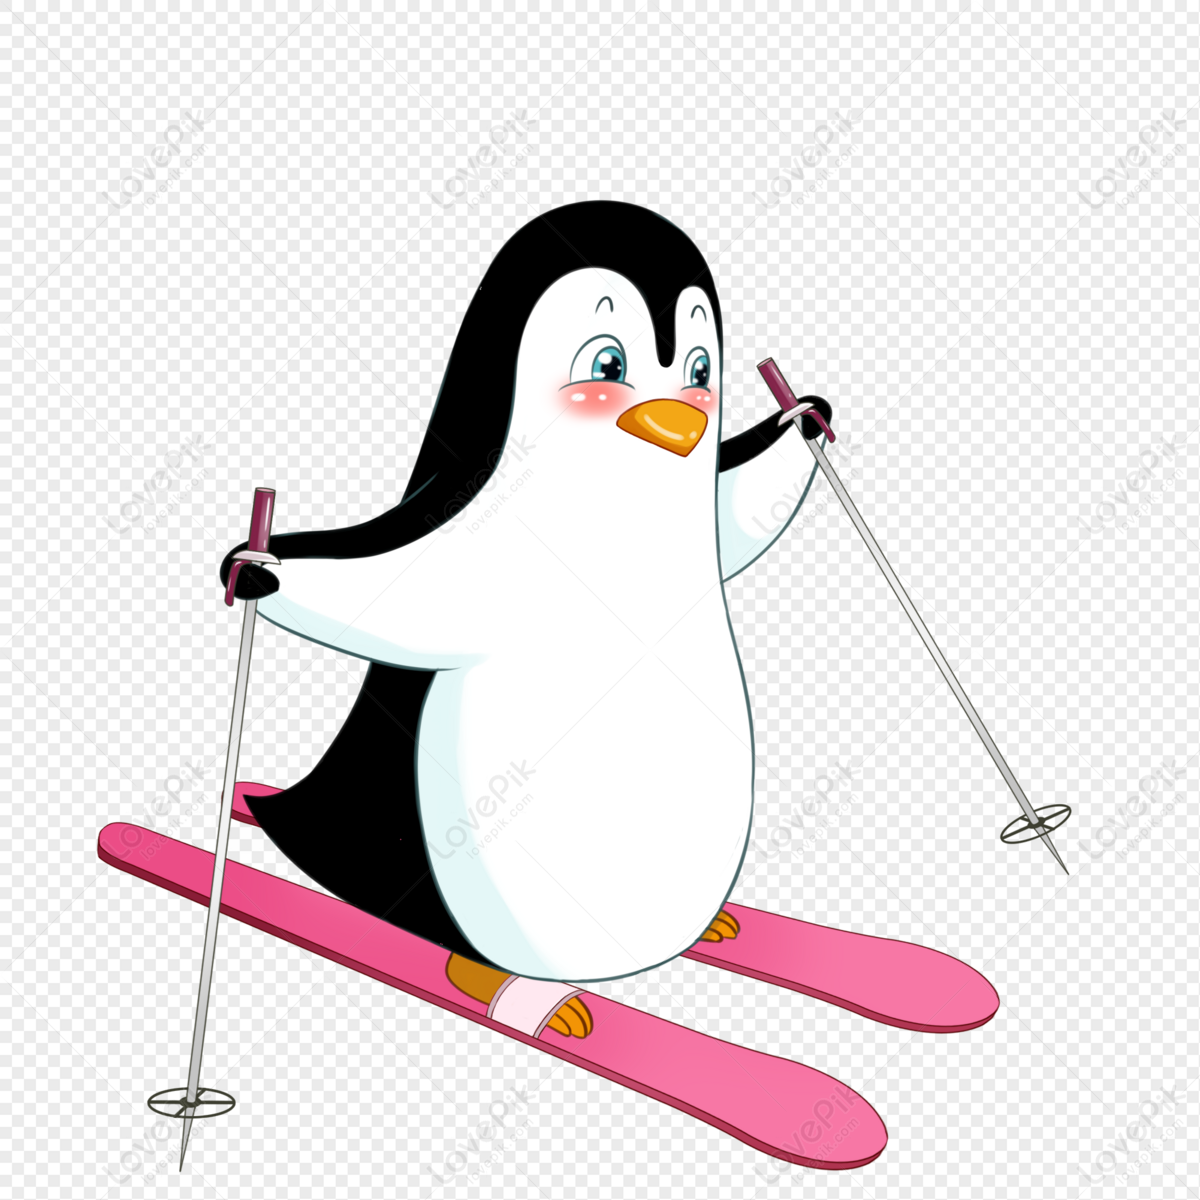 Skiing Penguin, Cold, Anime, Ski Free PNG And Clipart Image For Free  Download - Lovepik